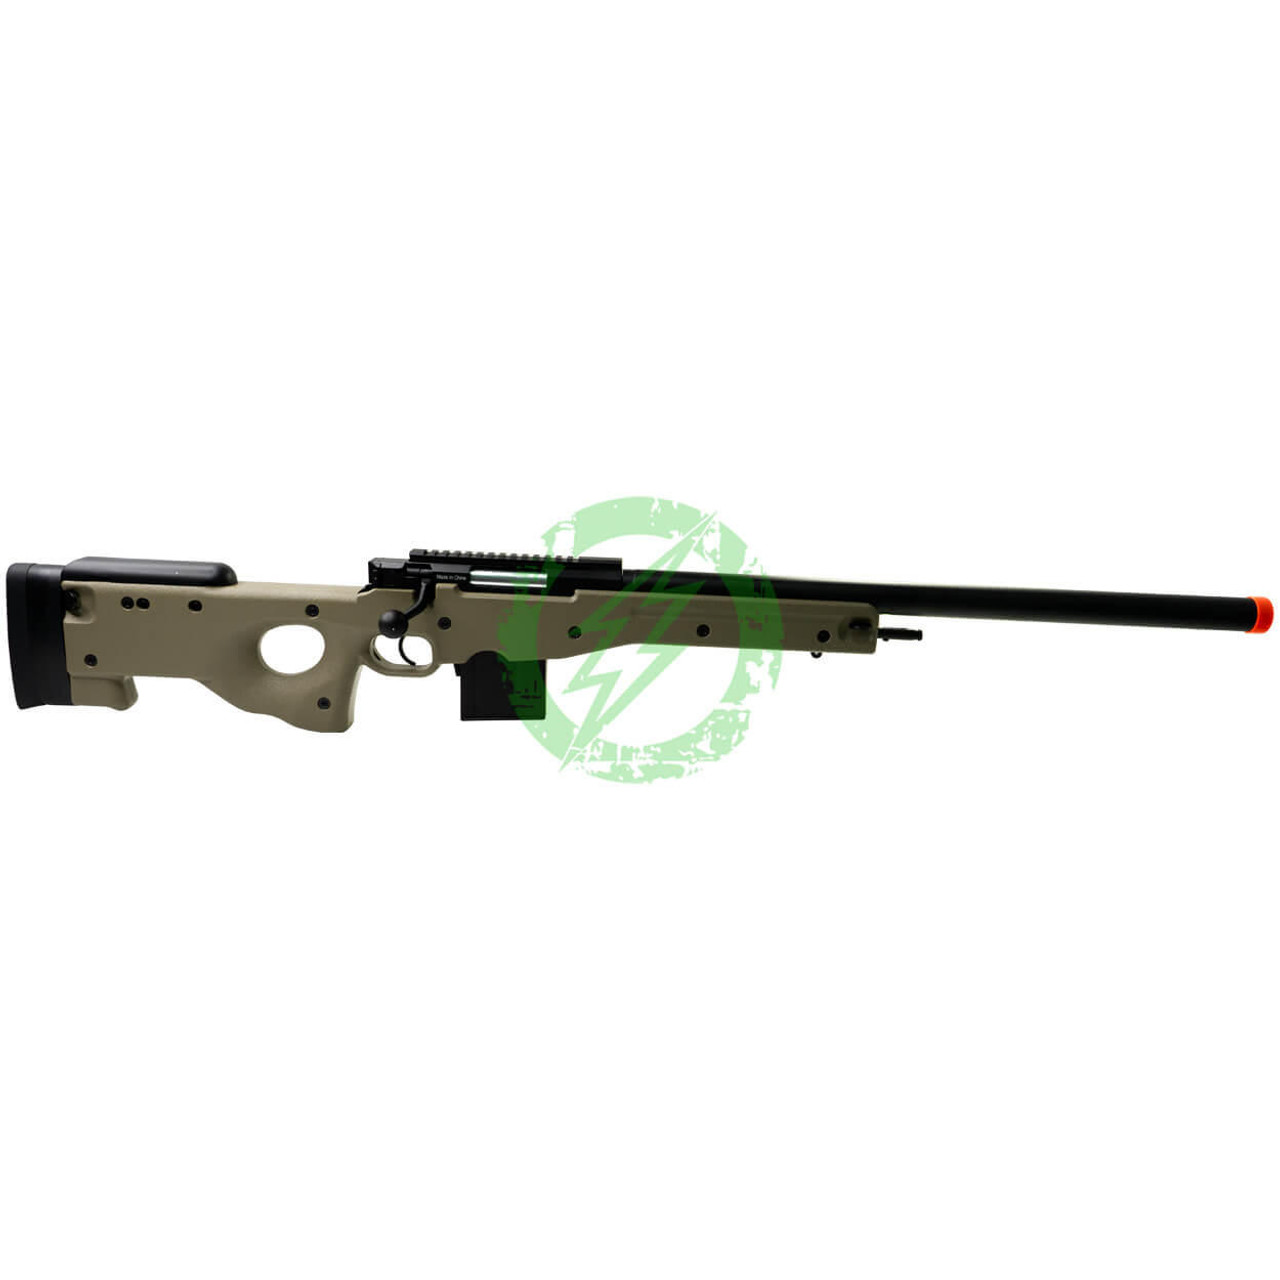  CYMA Standard L96 Bolt Action High Power Airsoft Sniper Rifle | Black, OD Green, and Tan 